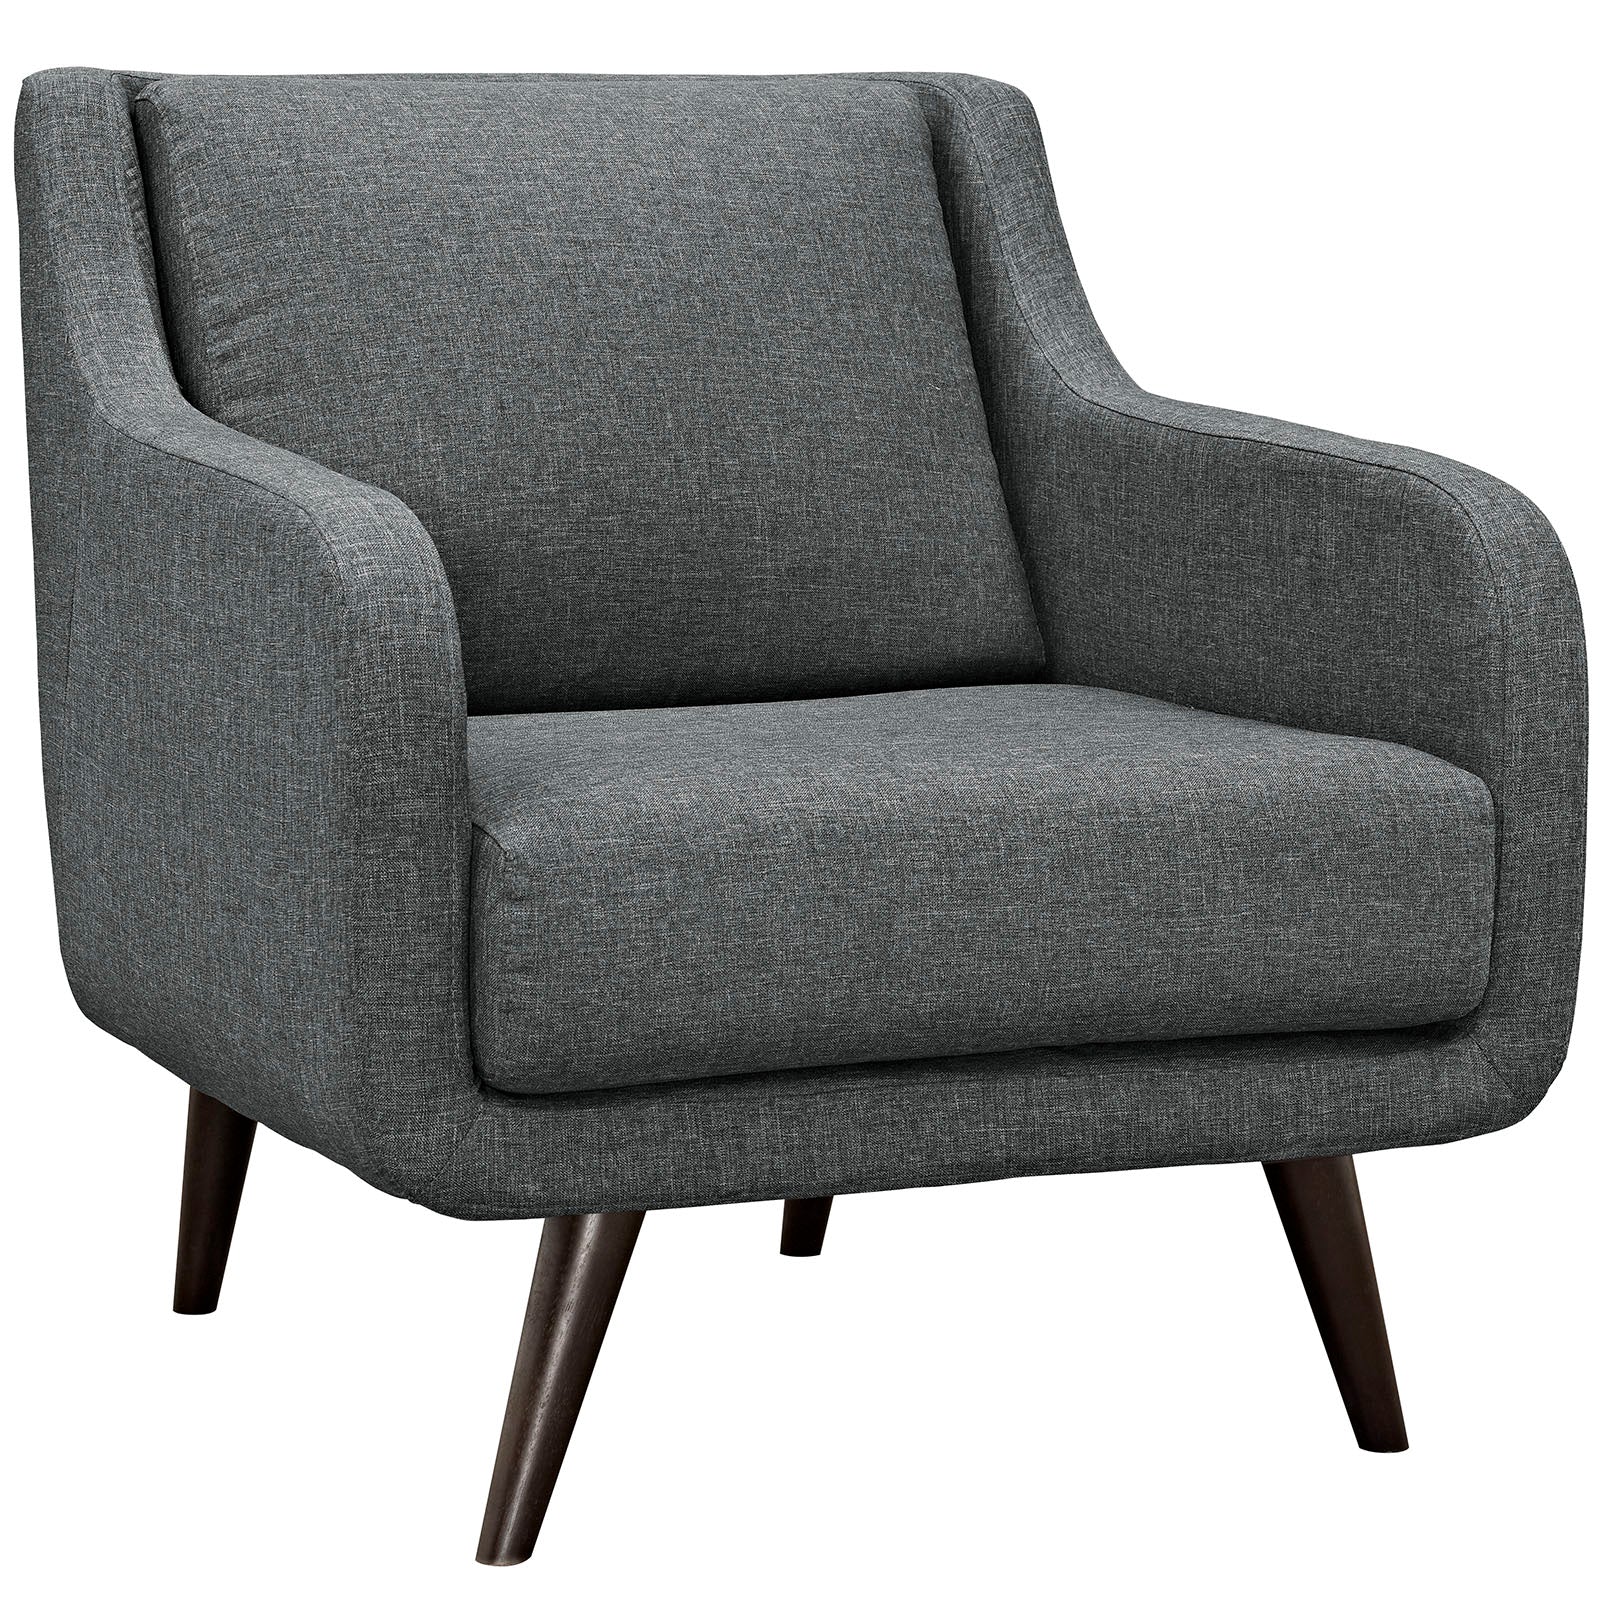 Modway Accent Chairs - Verve Upholstered Fabric Armchair Gray